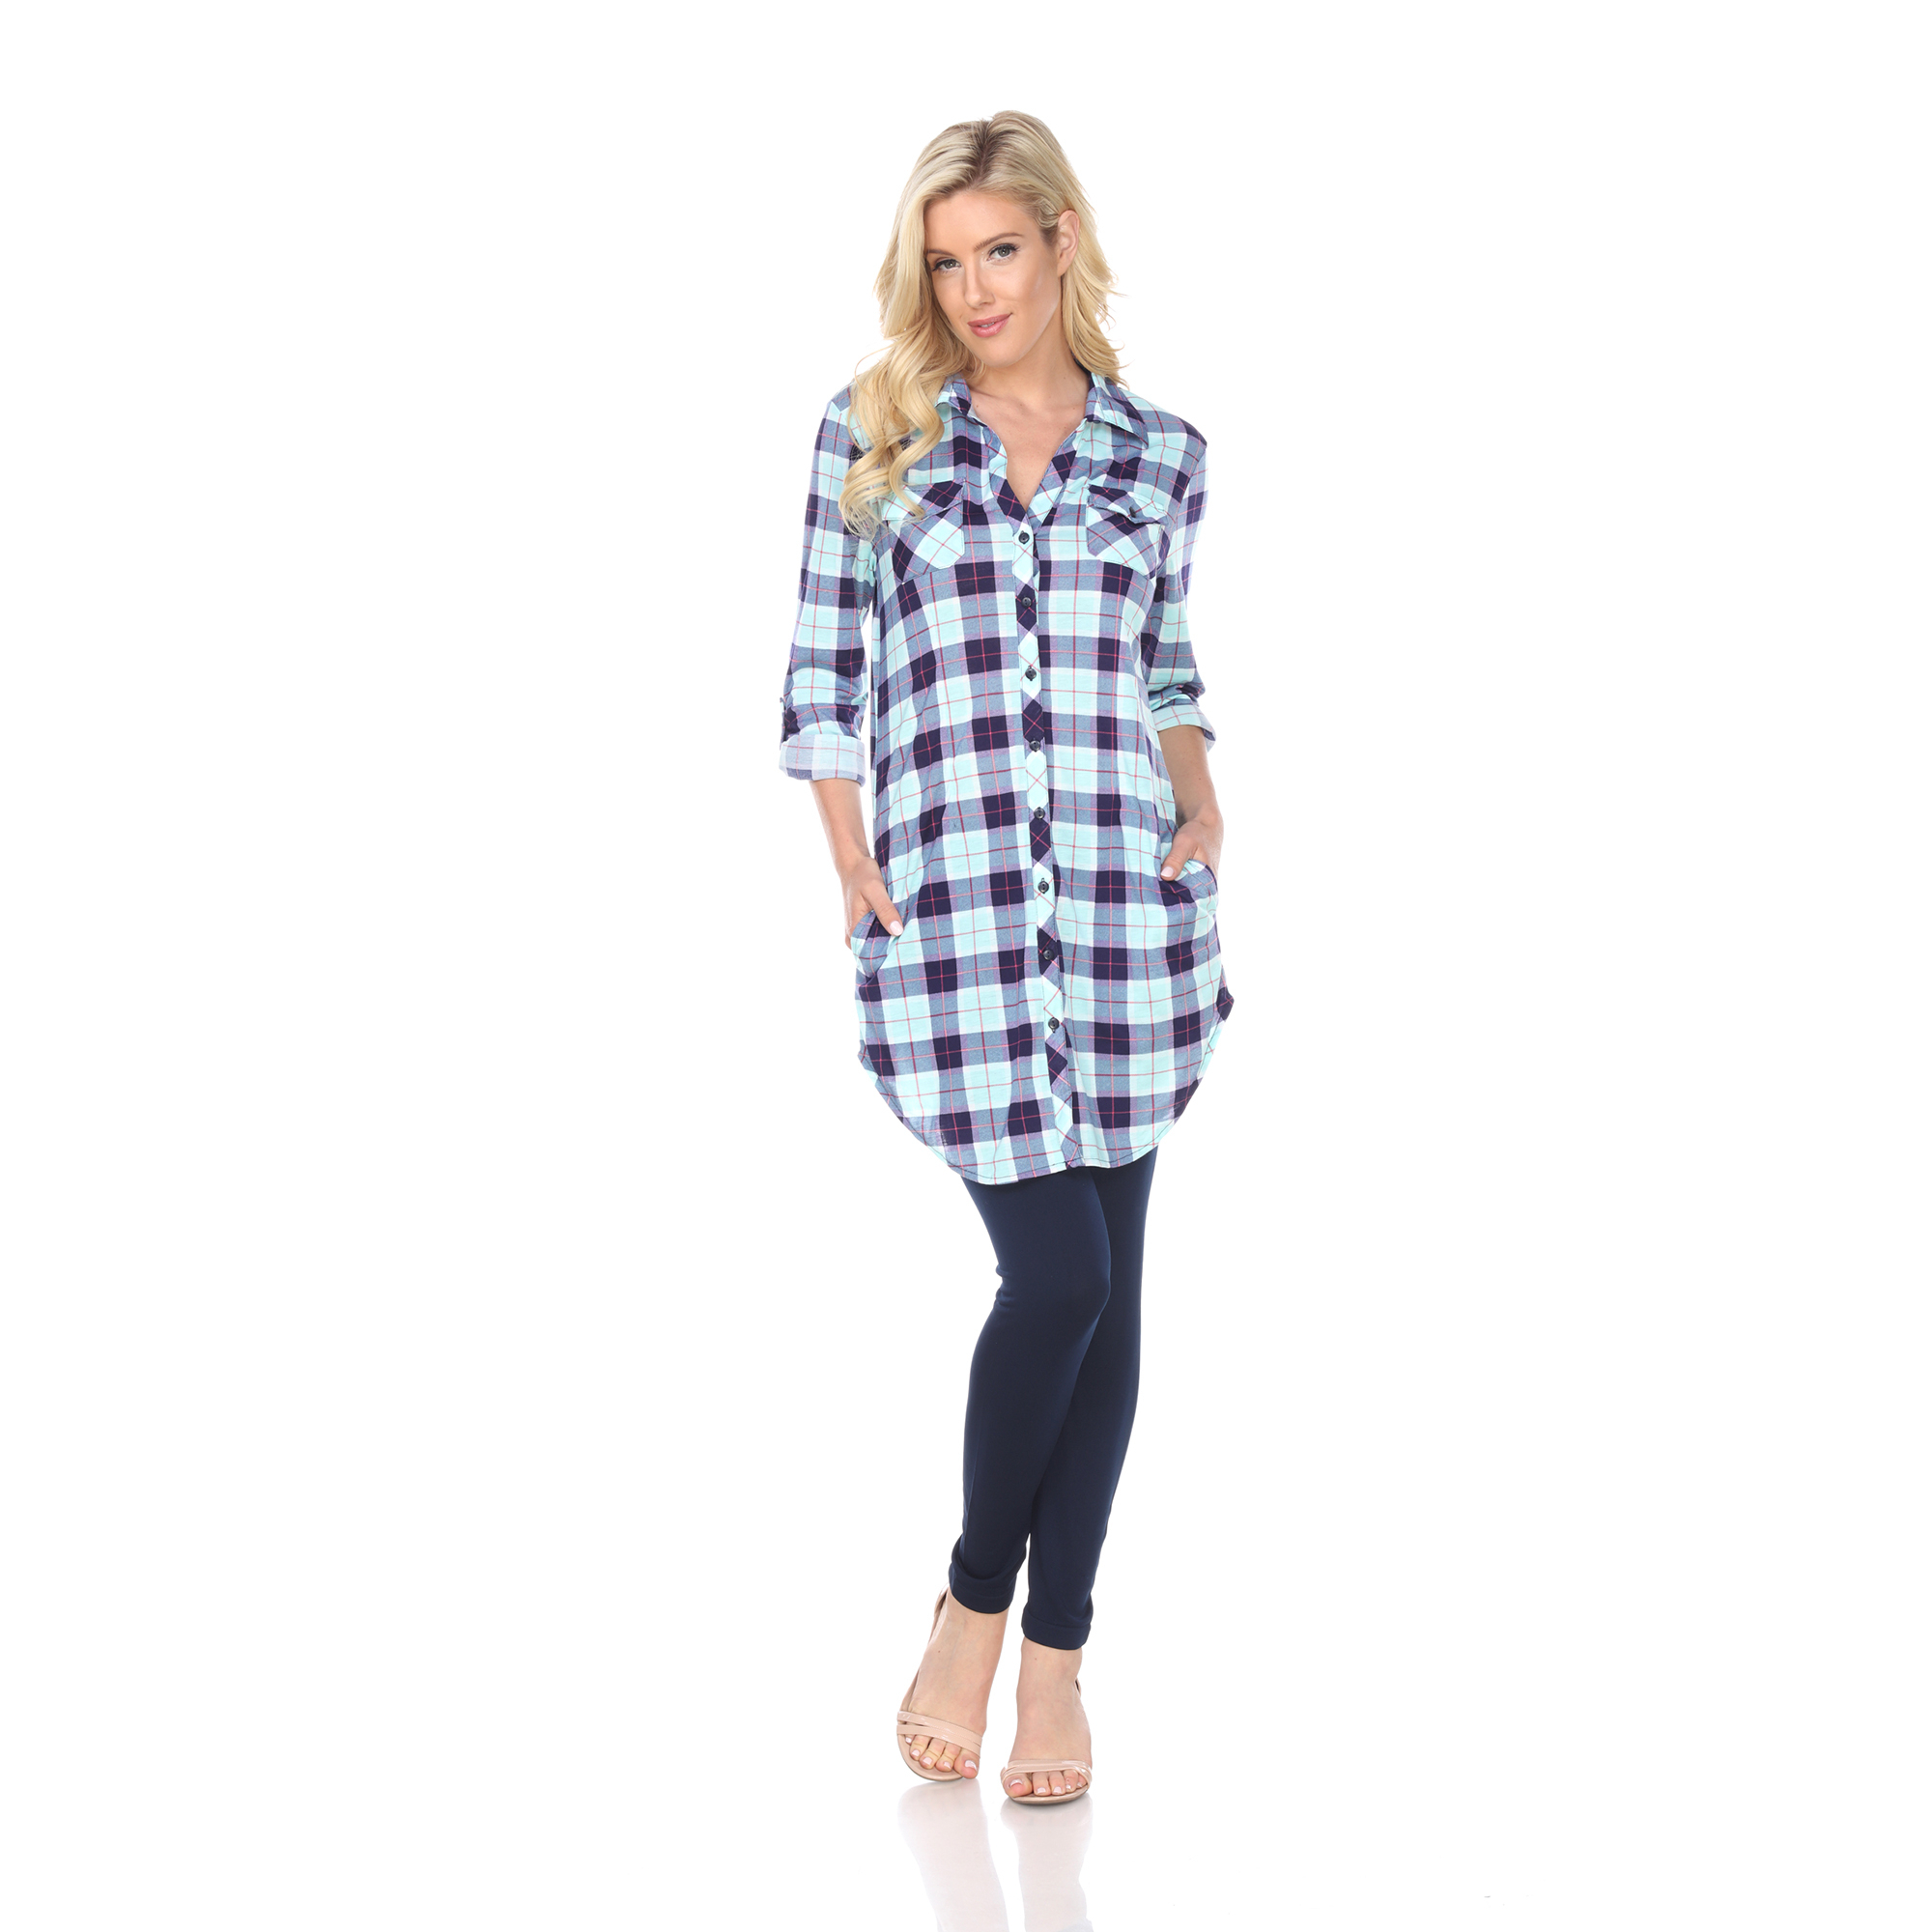 White Mark Women's Stretchy Plaid Flannel Tunic Top - Mint/Grey, Large